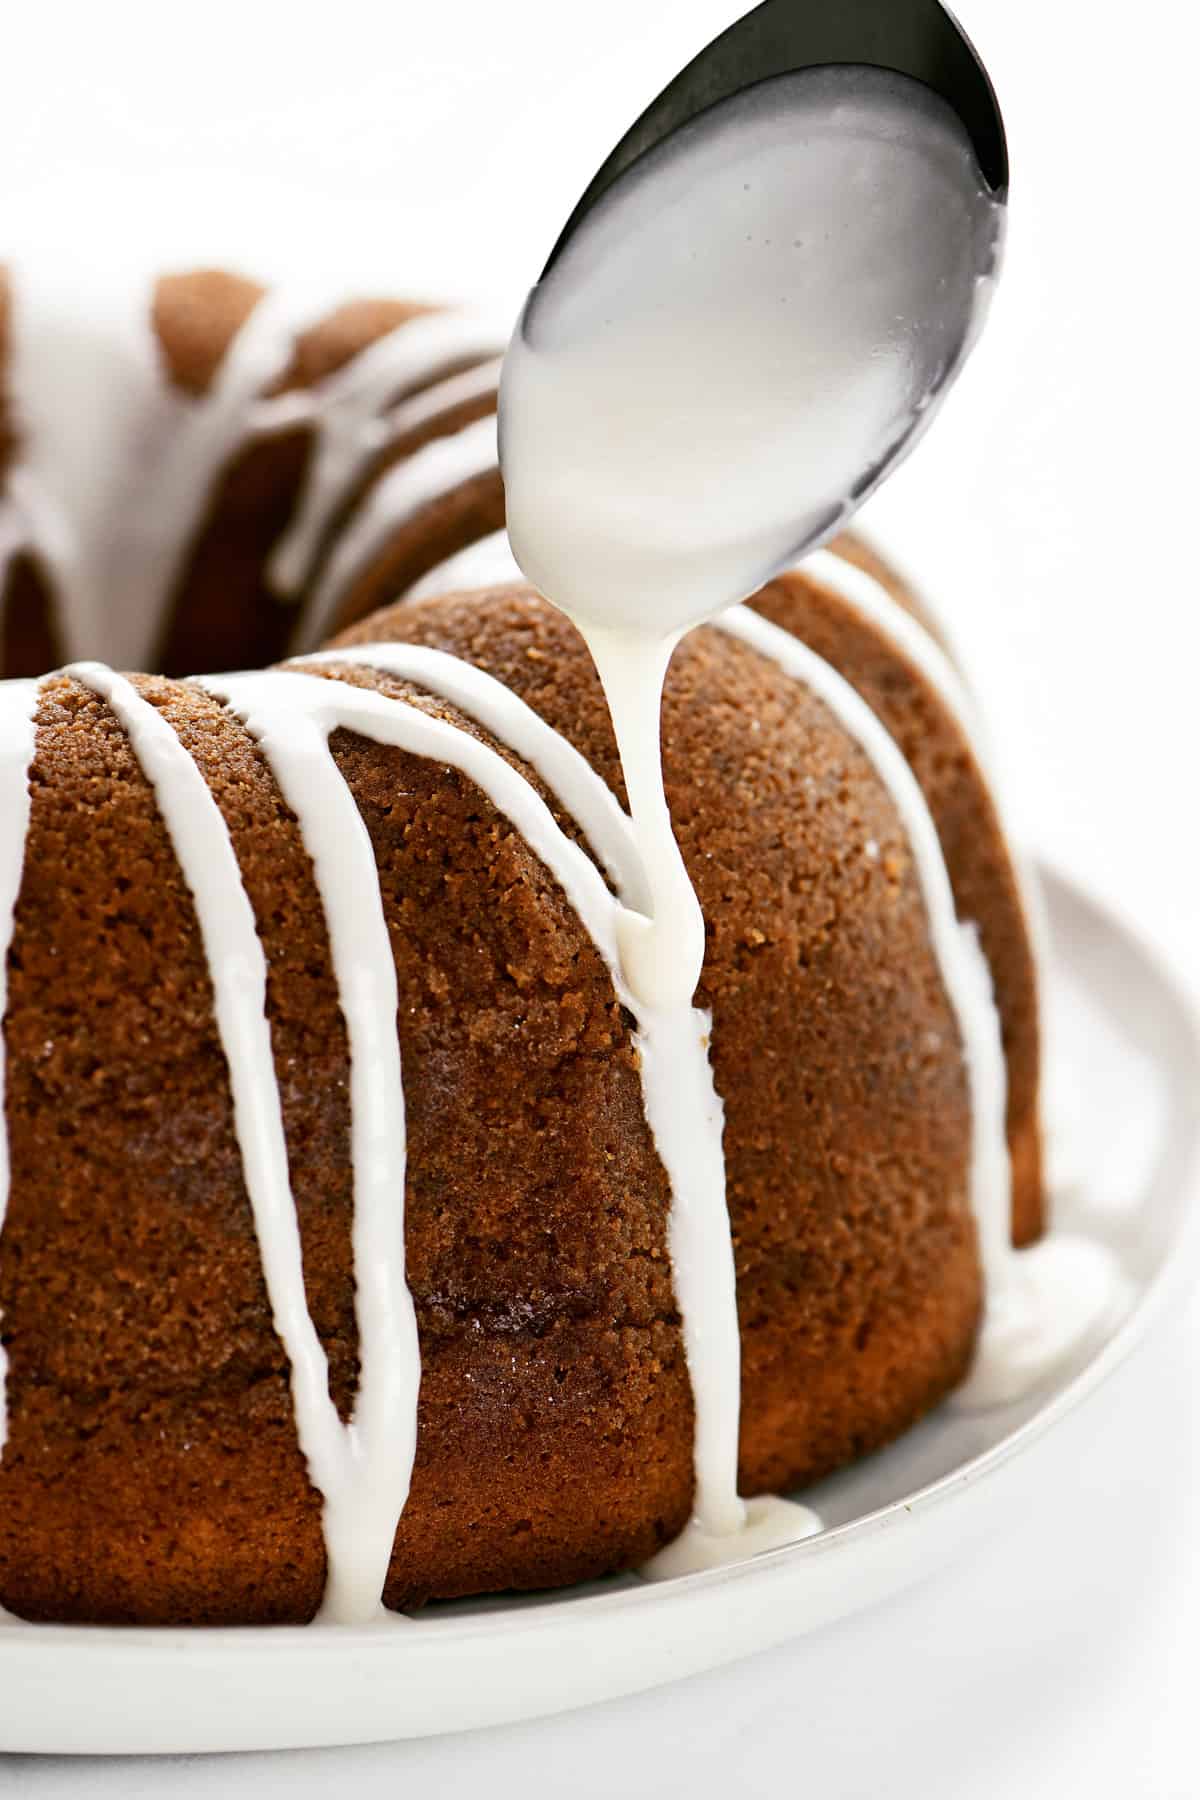 Powdered sugar icing being drizzled onto a bundt cake.